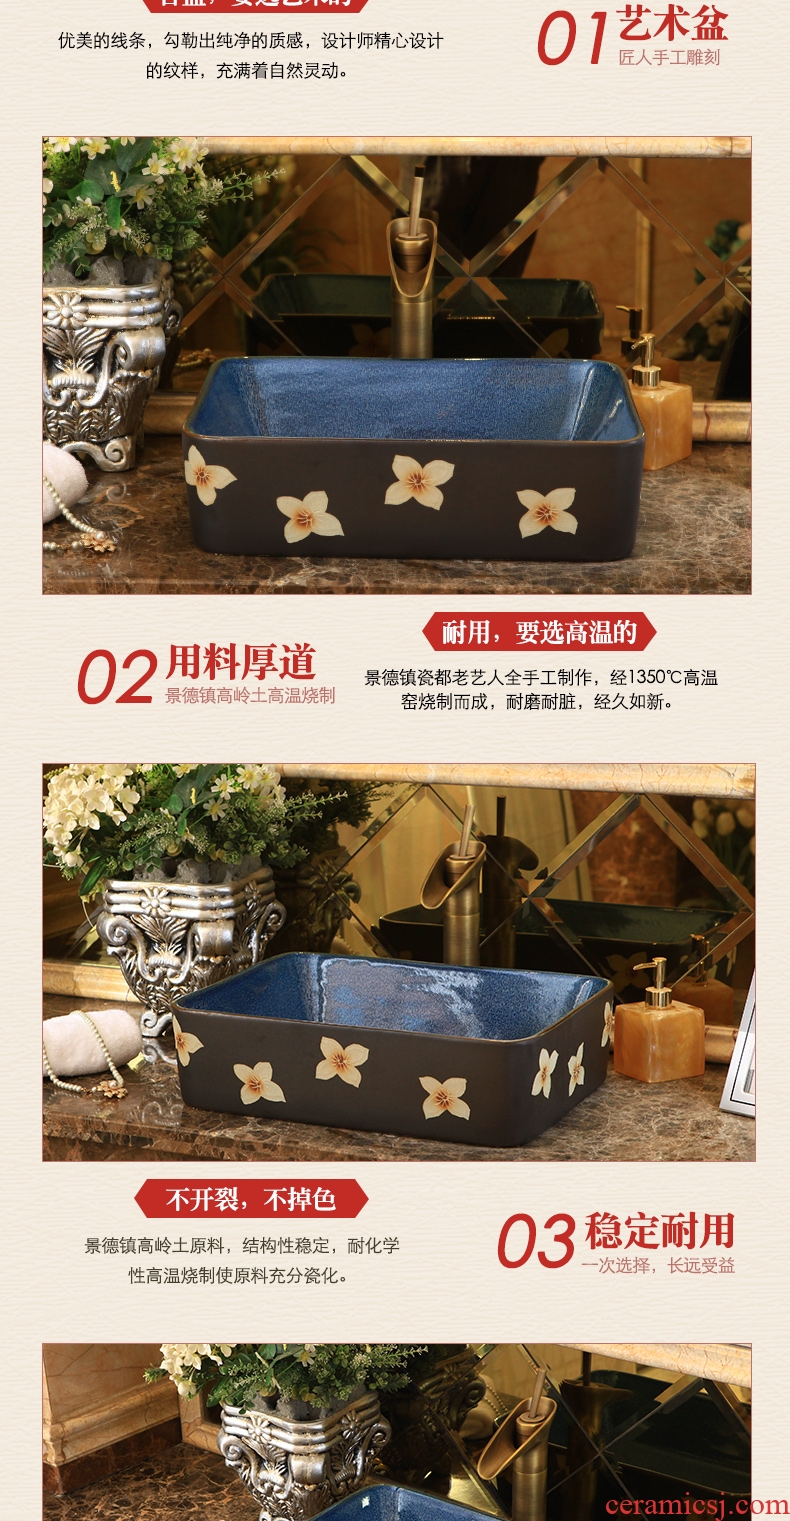 Ling yu stage basin ceramic square shape the lavatory toilet lavabo balcony art restores ancient ways of the basin that wash a face basin